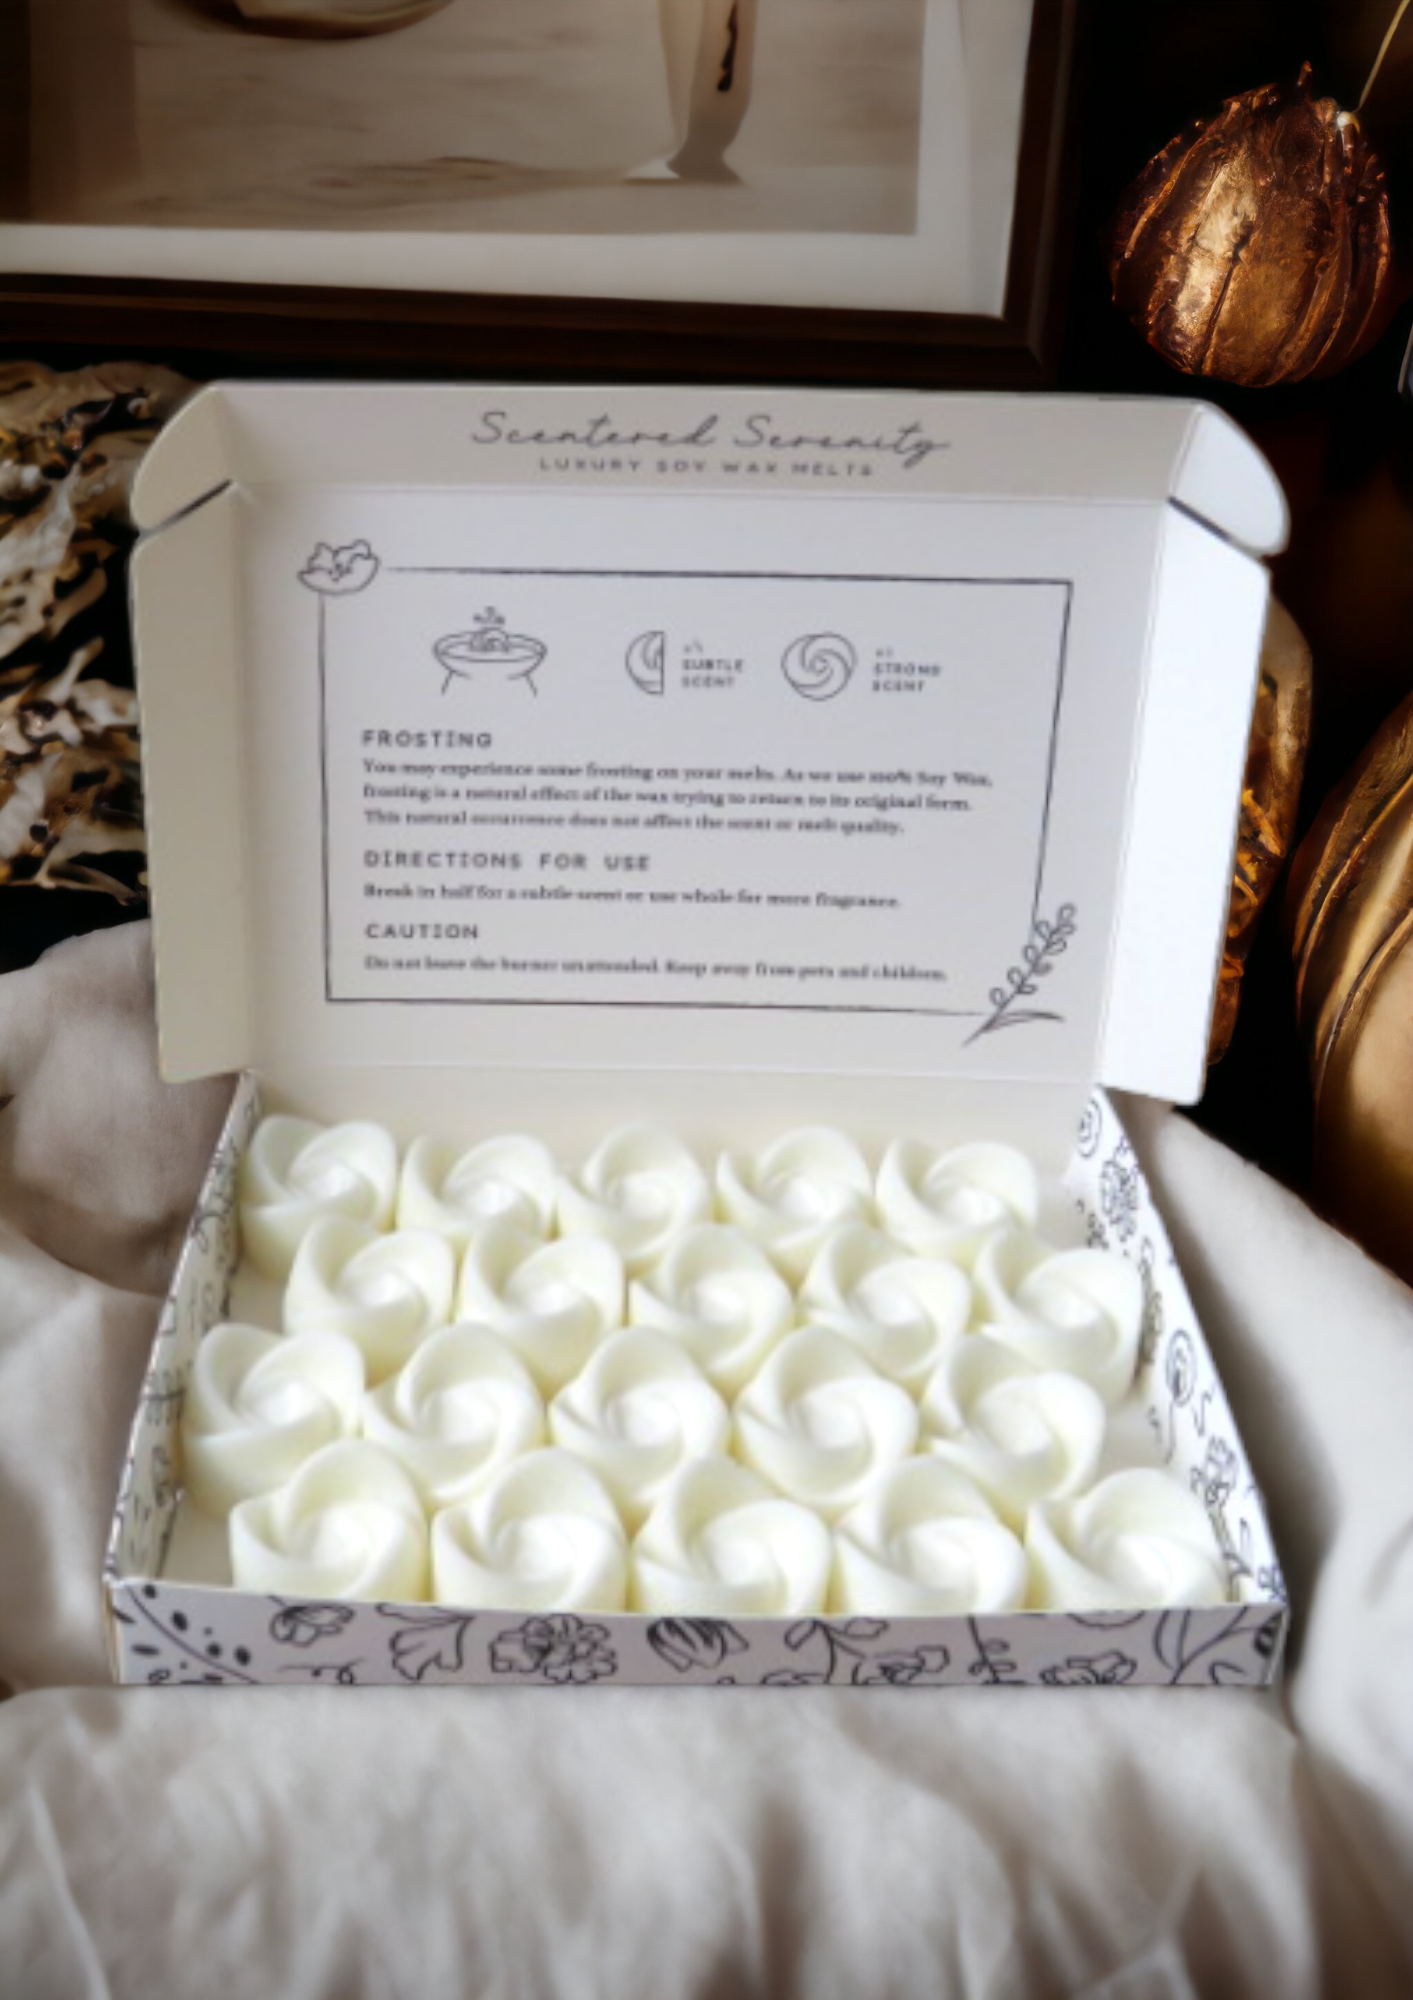 Snap Bar Scented Wax Melts Scented Wax Melt Gifts Luxury Handmade Wax Melt  Highly Scented Soy Wax Melts Hand Made Wax Melts in UK 